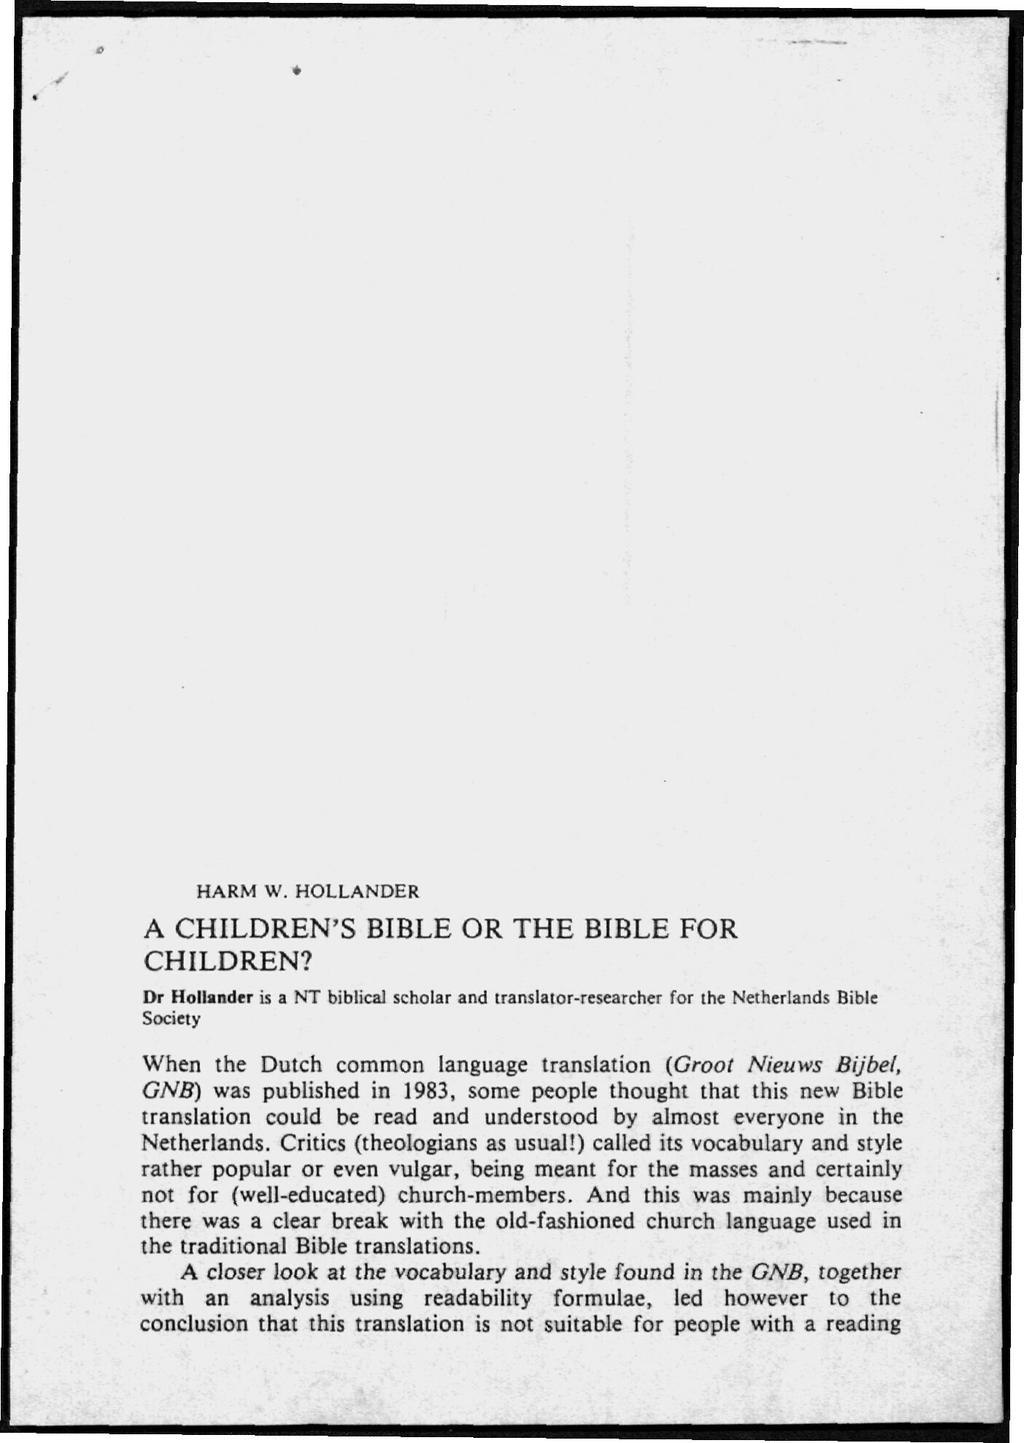 HARM W. HOLLANDER A CHILDREN'S BIBLE OR THE BIBLE FOR CHILDREN?